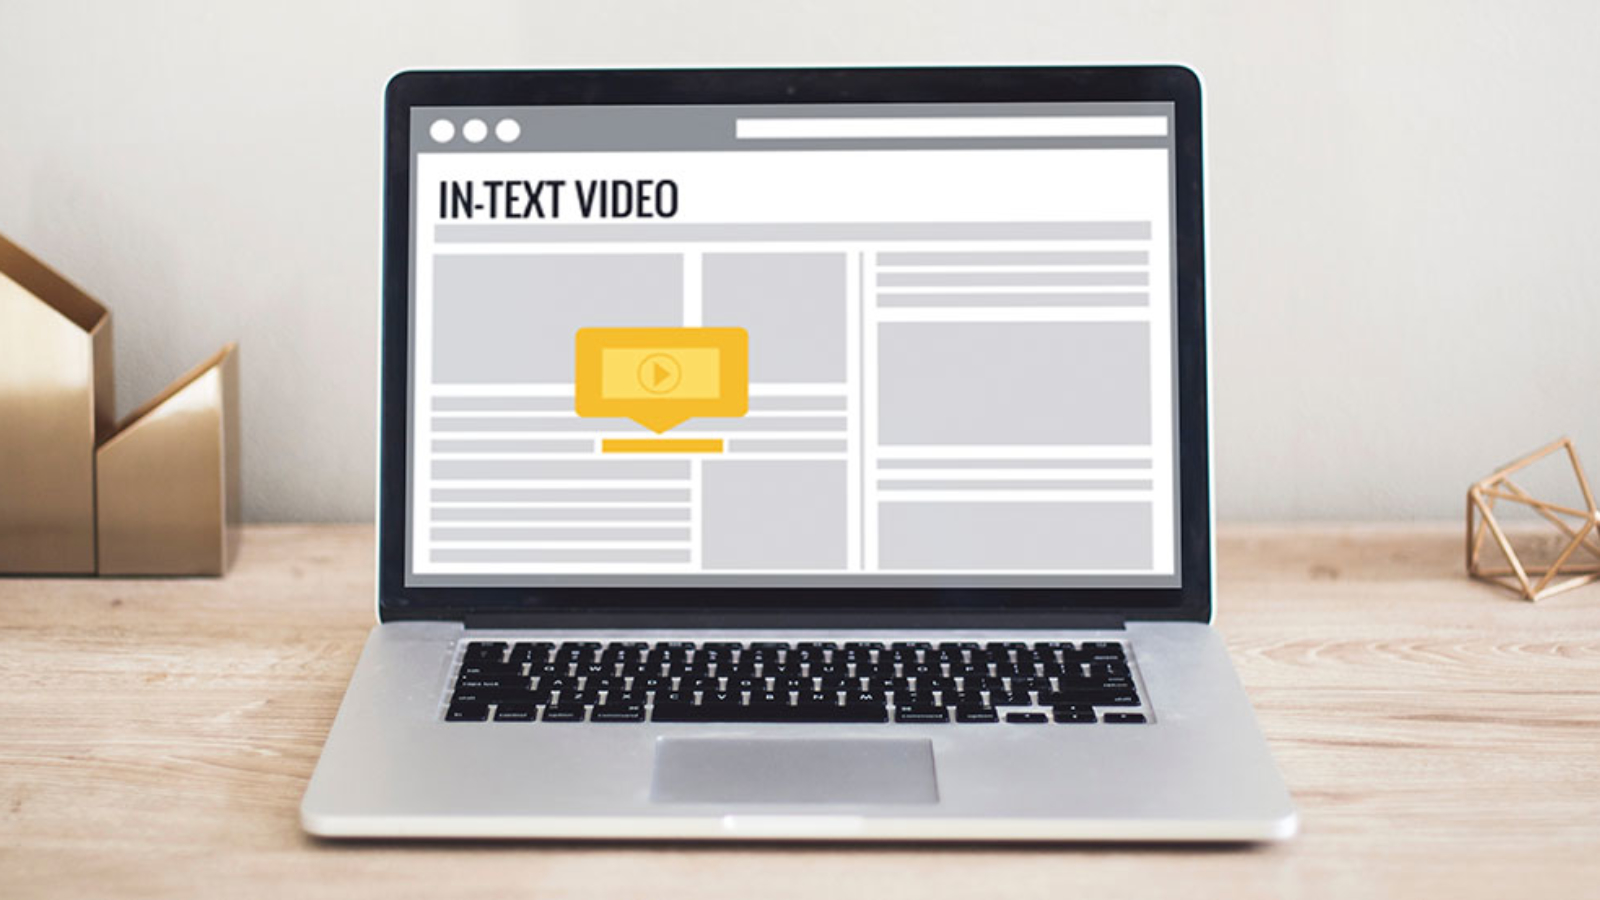 4-SIMPLE-RULES-FOR-COMBINING-TEXT-WITH-VIDEO